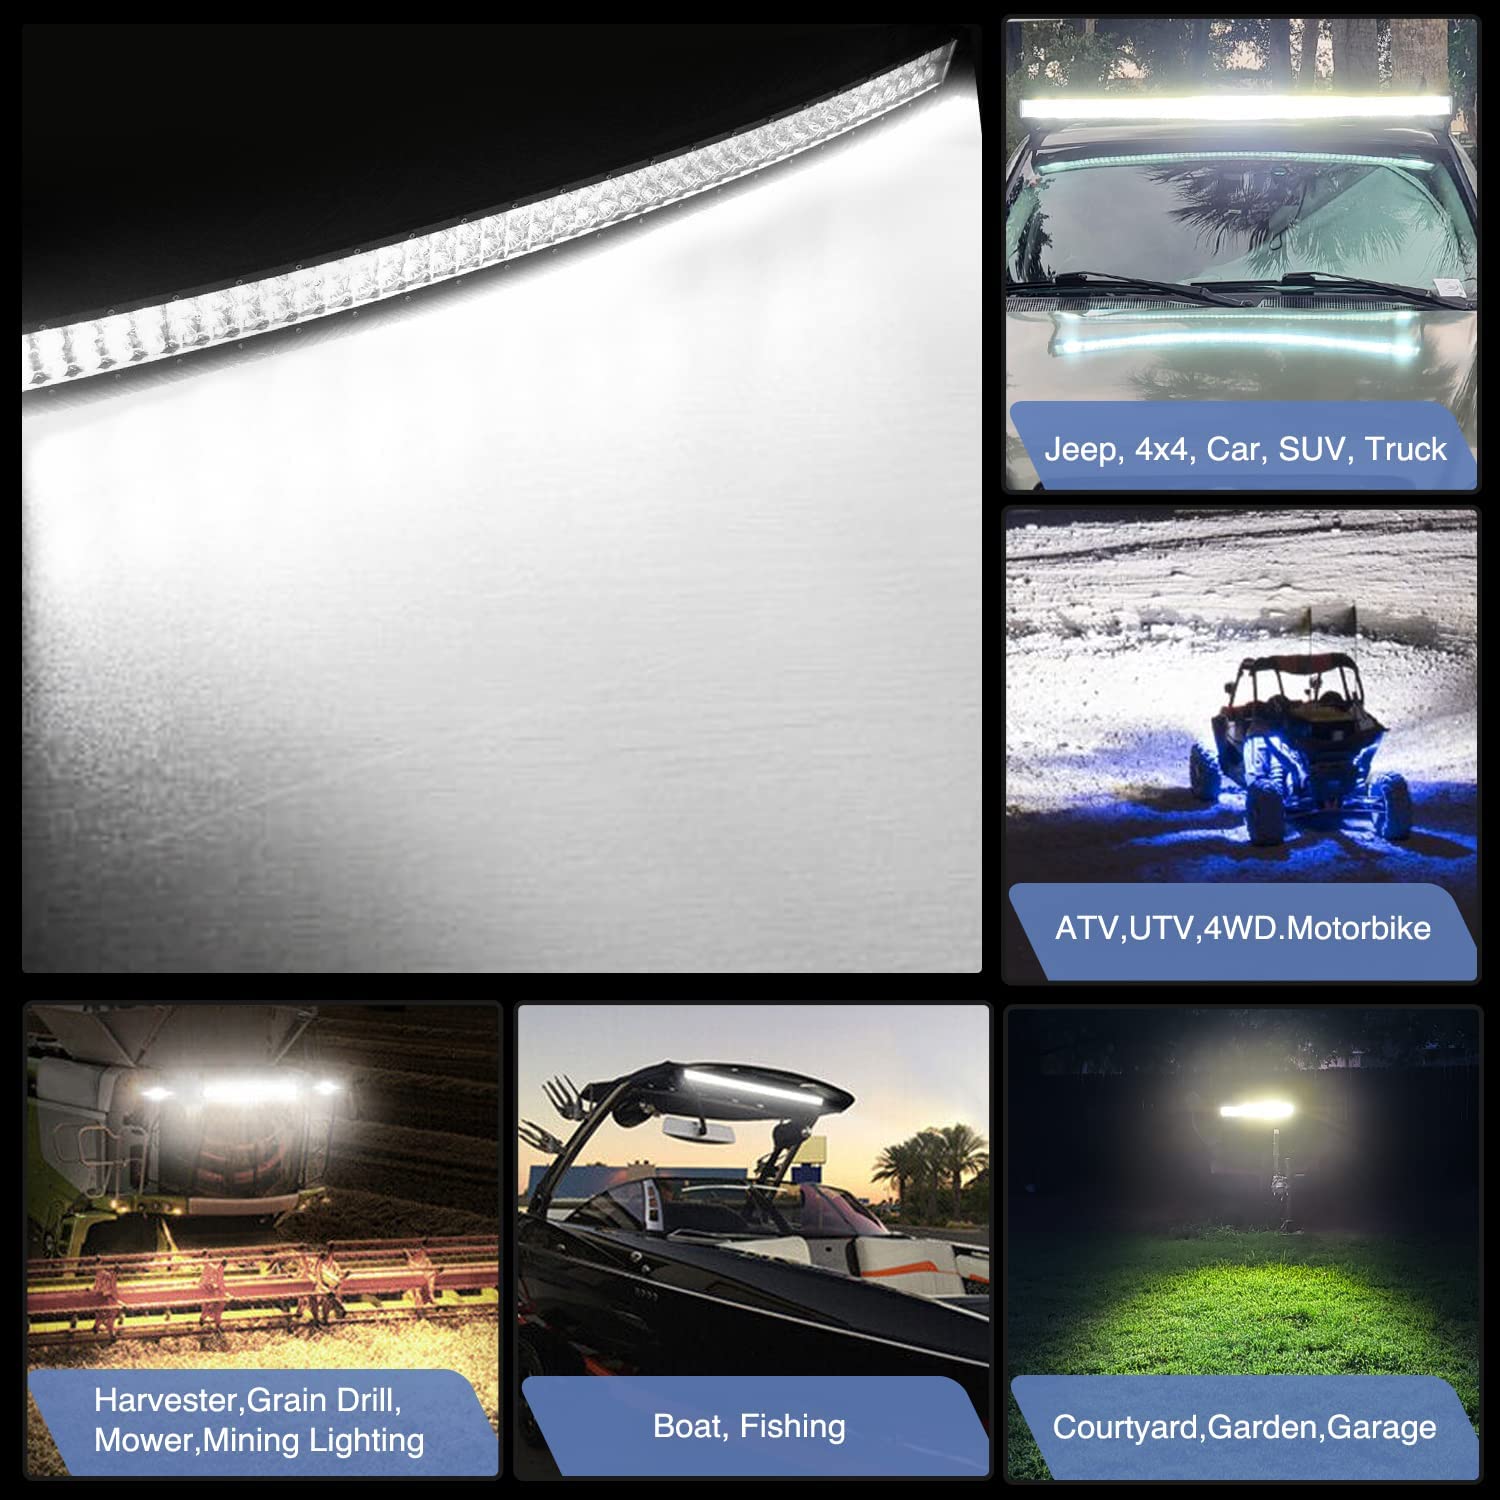 Red 52 700W LED Light Bar Flood Spot Combo for Off-road Driving from  Weathers Auto Supply